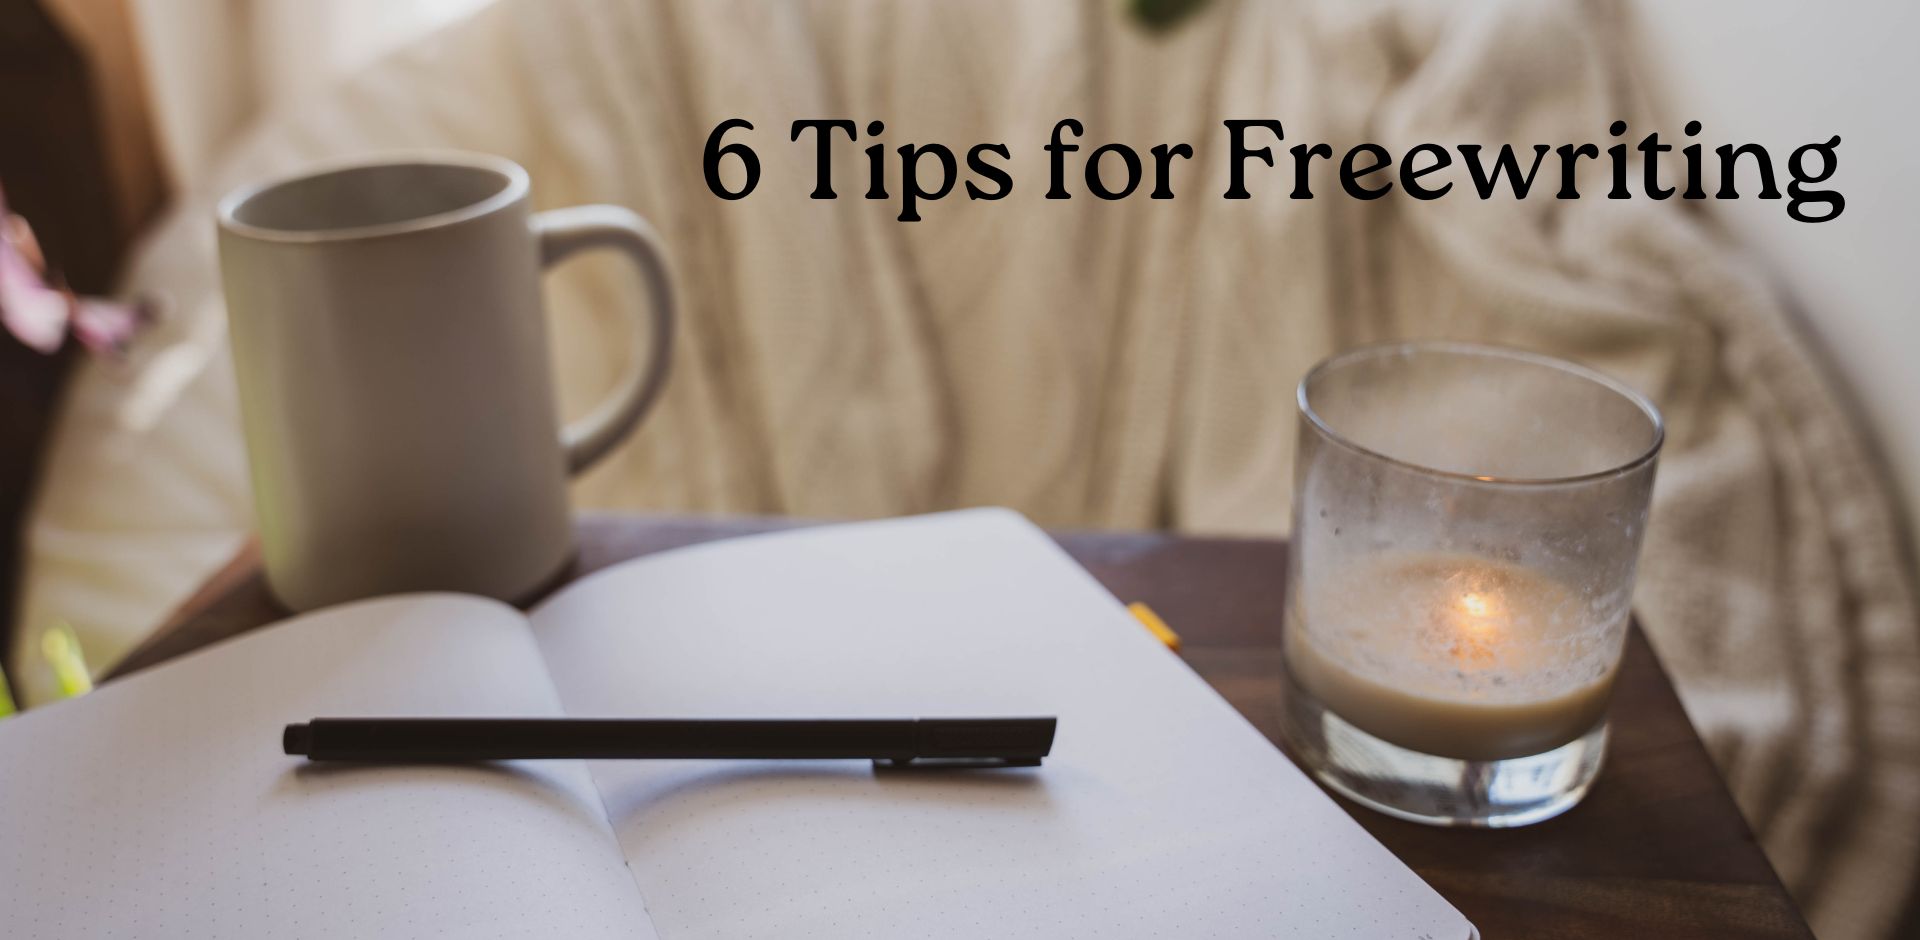 6 Tips for Freewriting